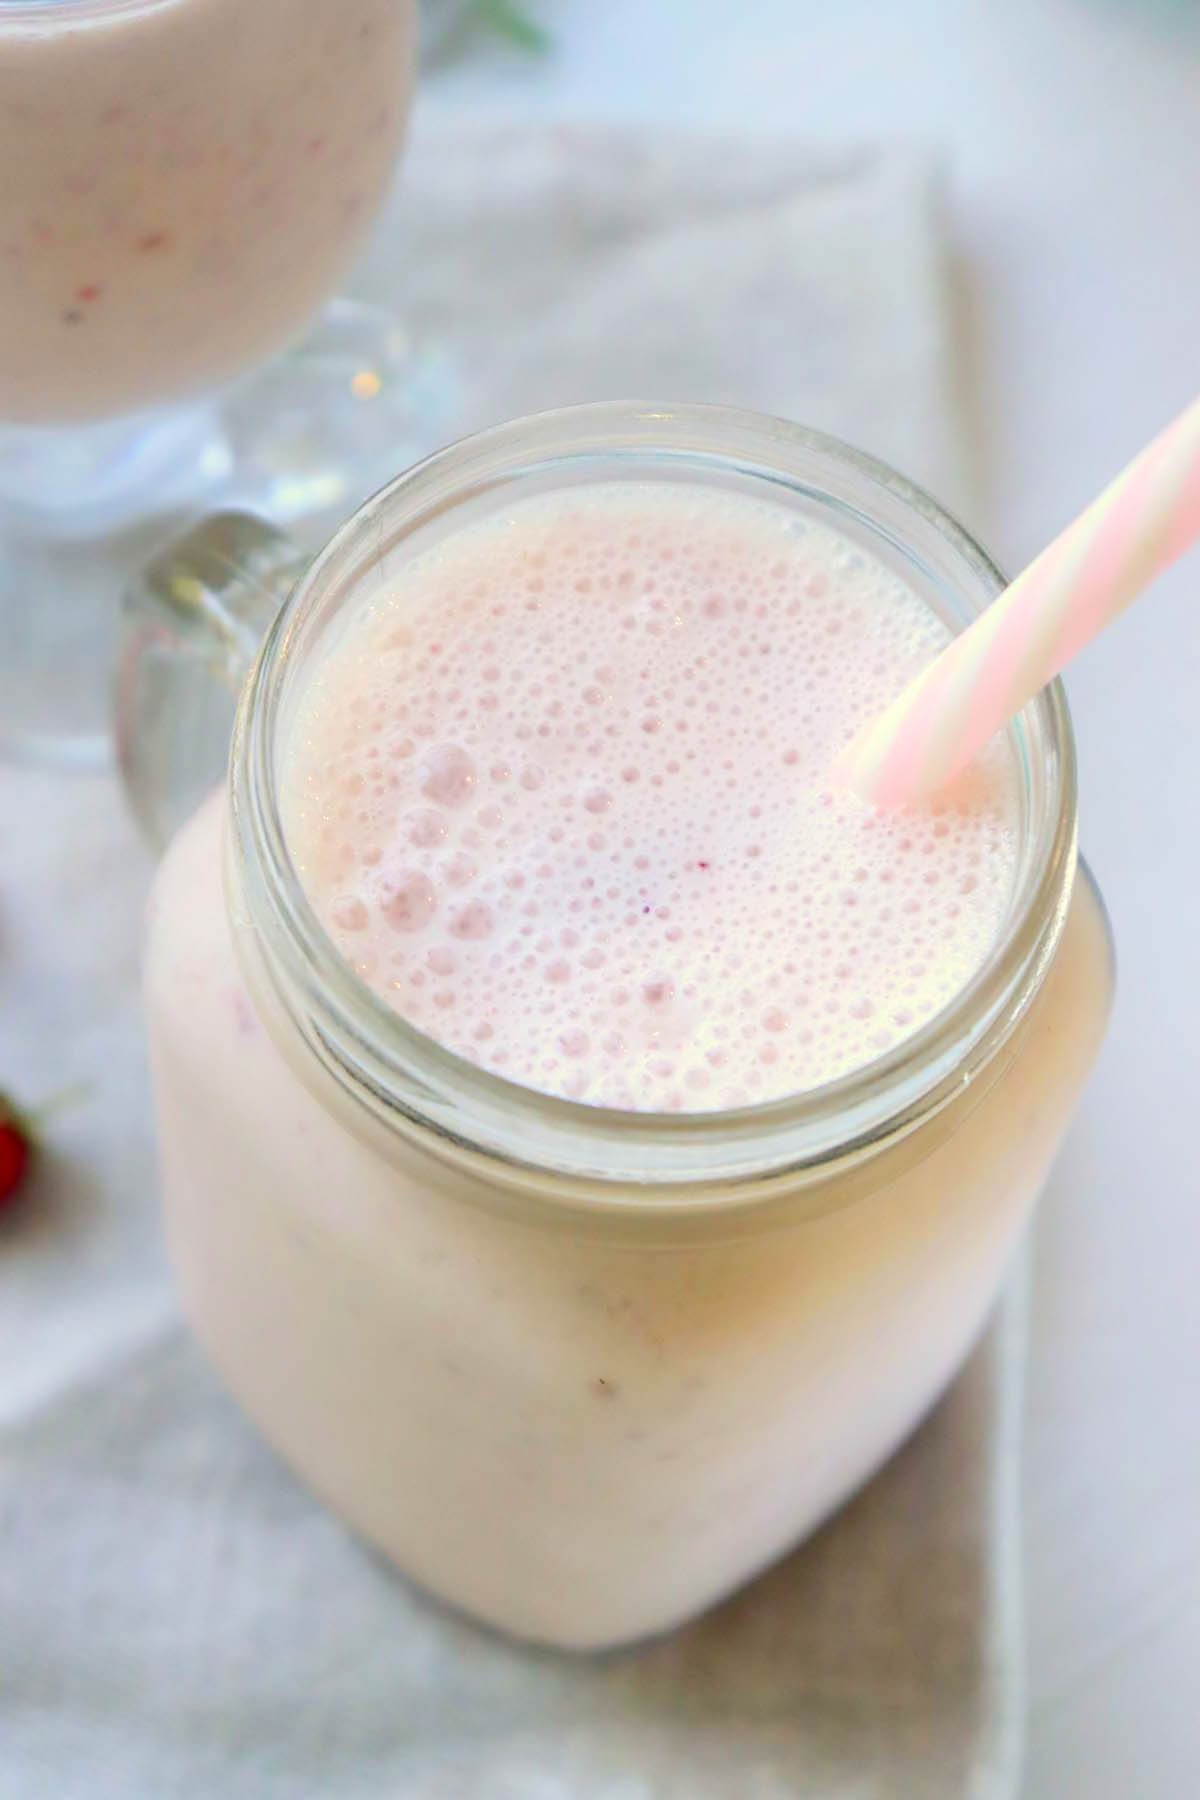 Smoothie in a jar with a pink straw.